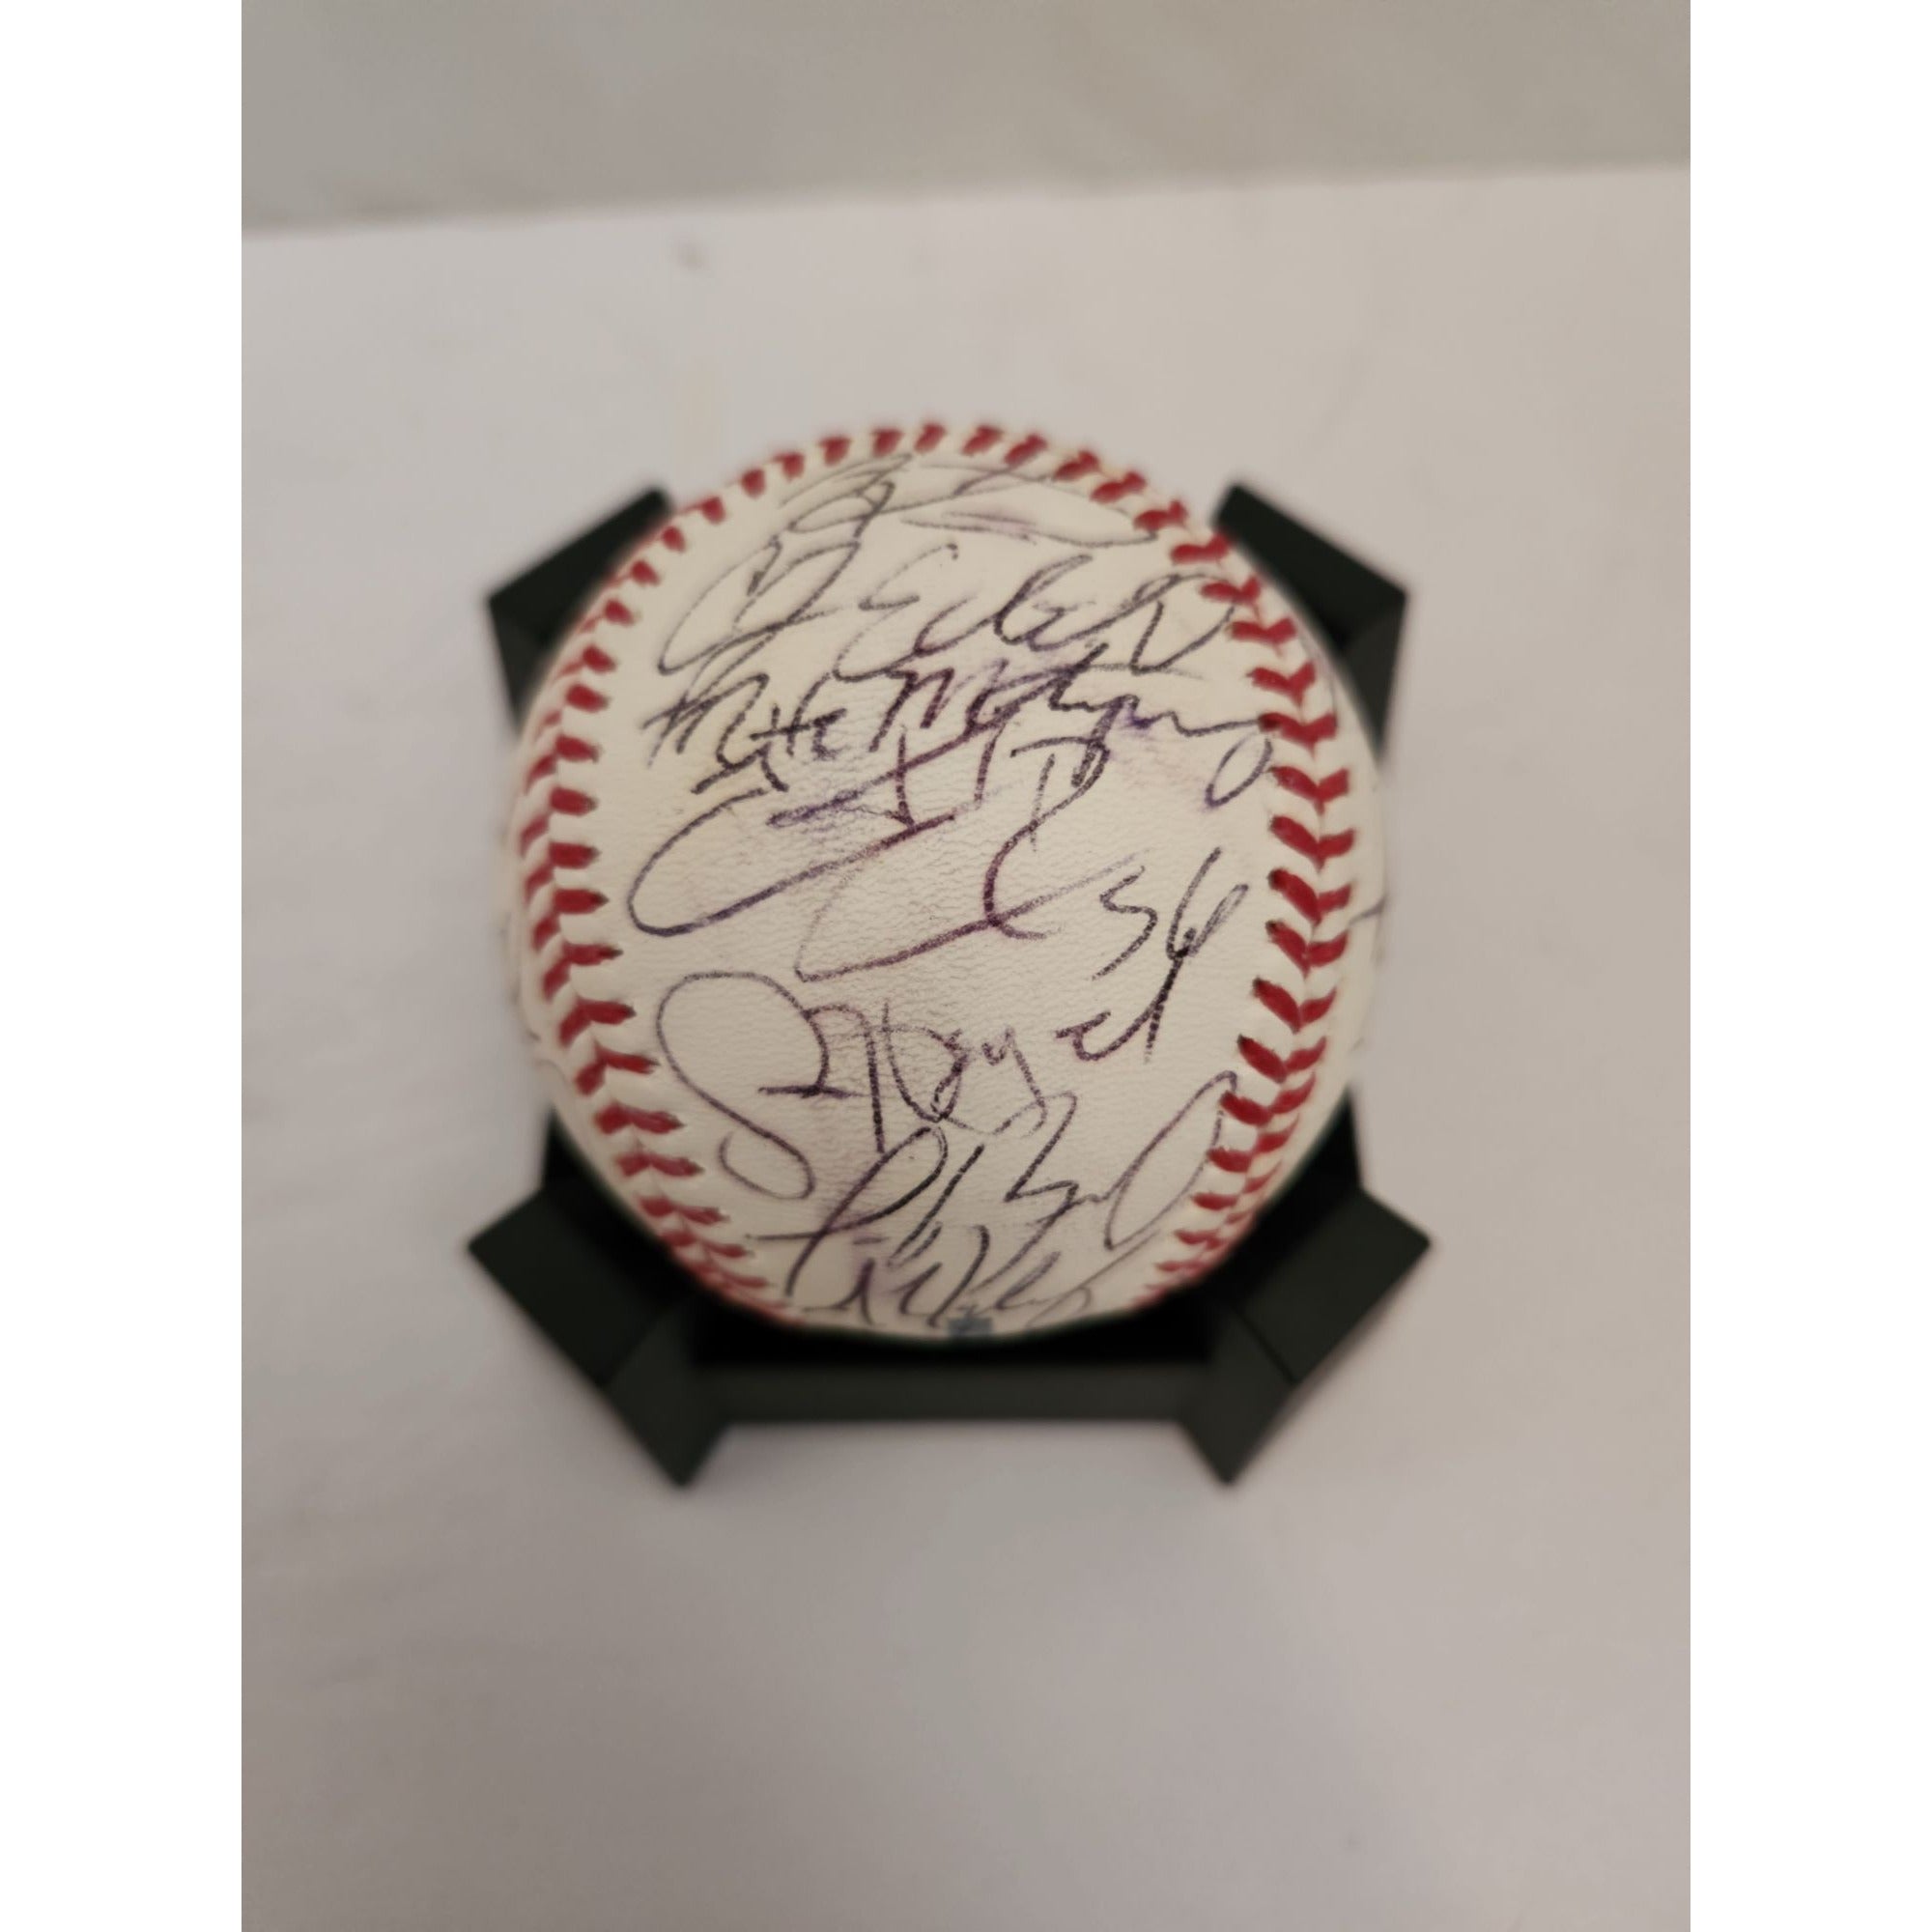 Anthony Rizzo Joe Maddon Chicago Cubs World Series champions team sign –  Awesome Artifacts